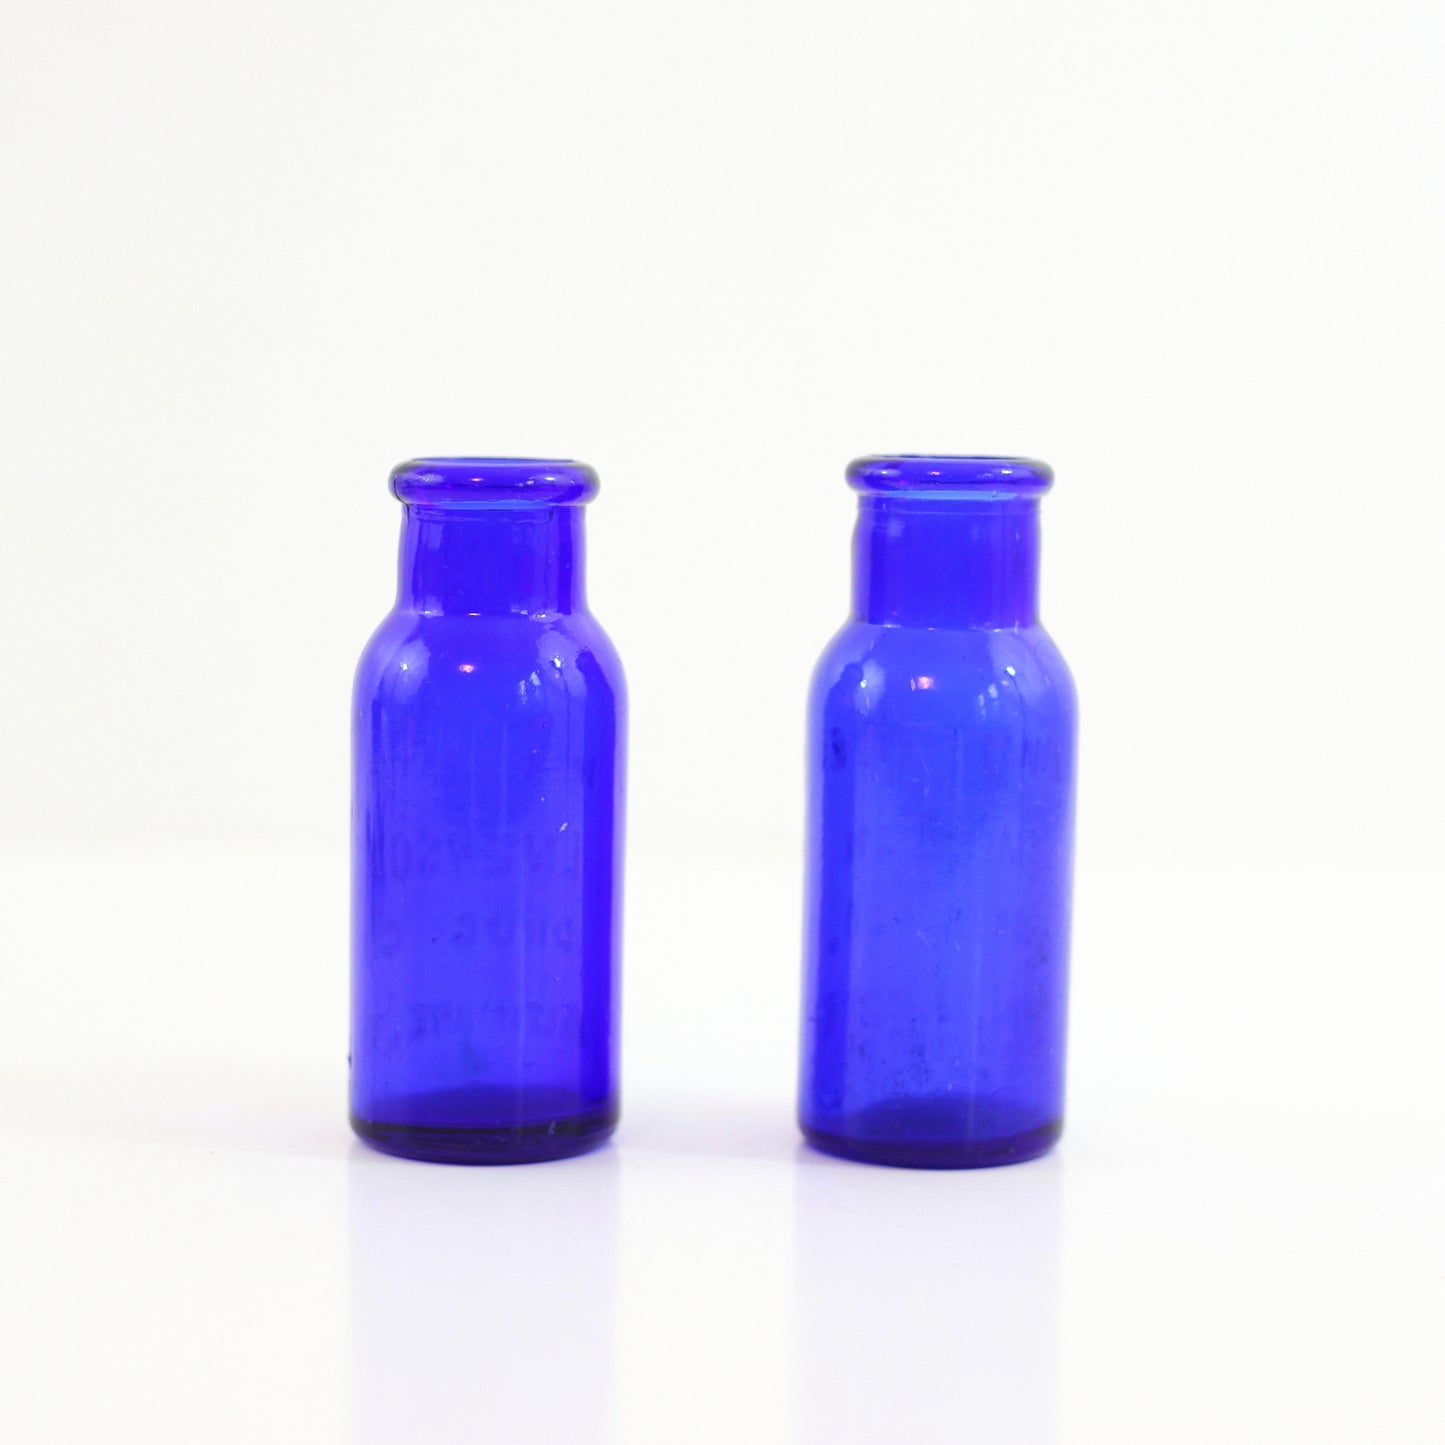 SOLD - 1940s Bromo Seltzer Apothecary Bottles